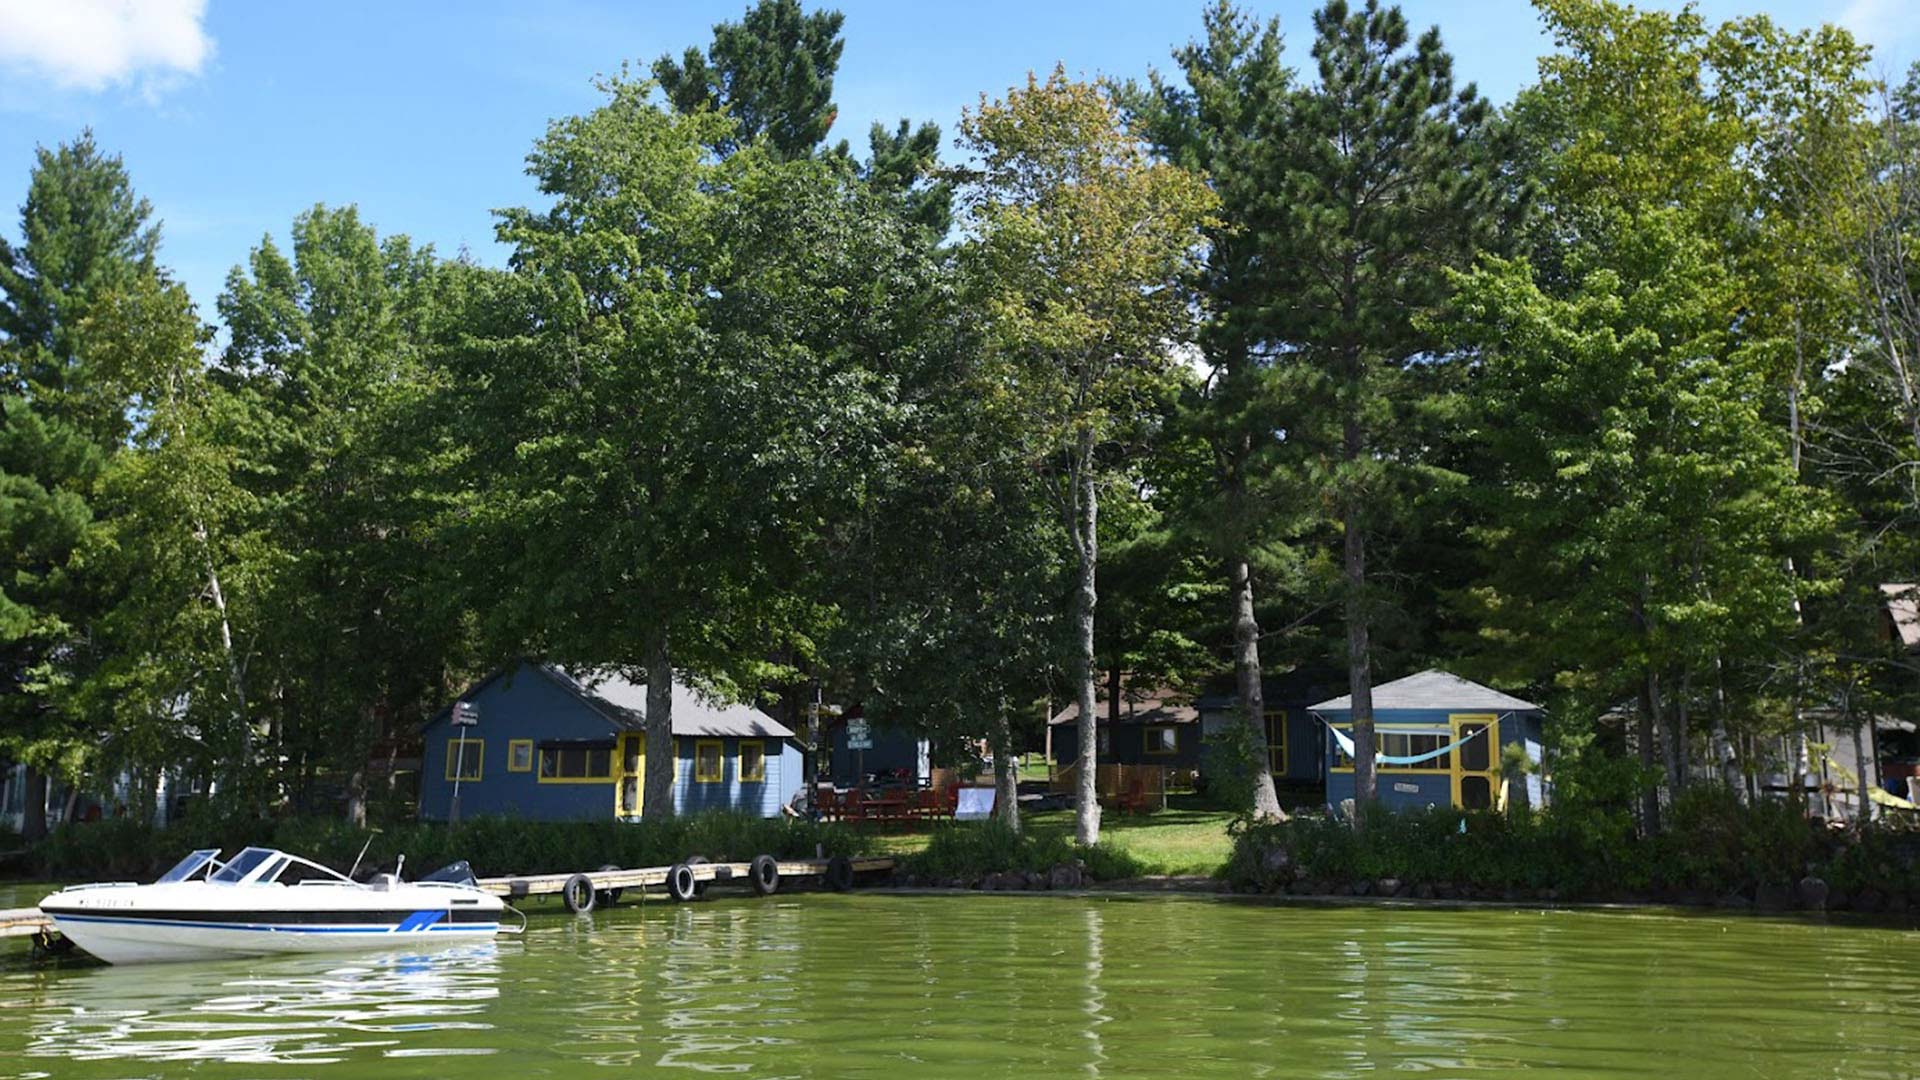 Visit Oneida County This Summer | View of Willemsen's Golden Sands Resort from the water